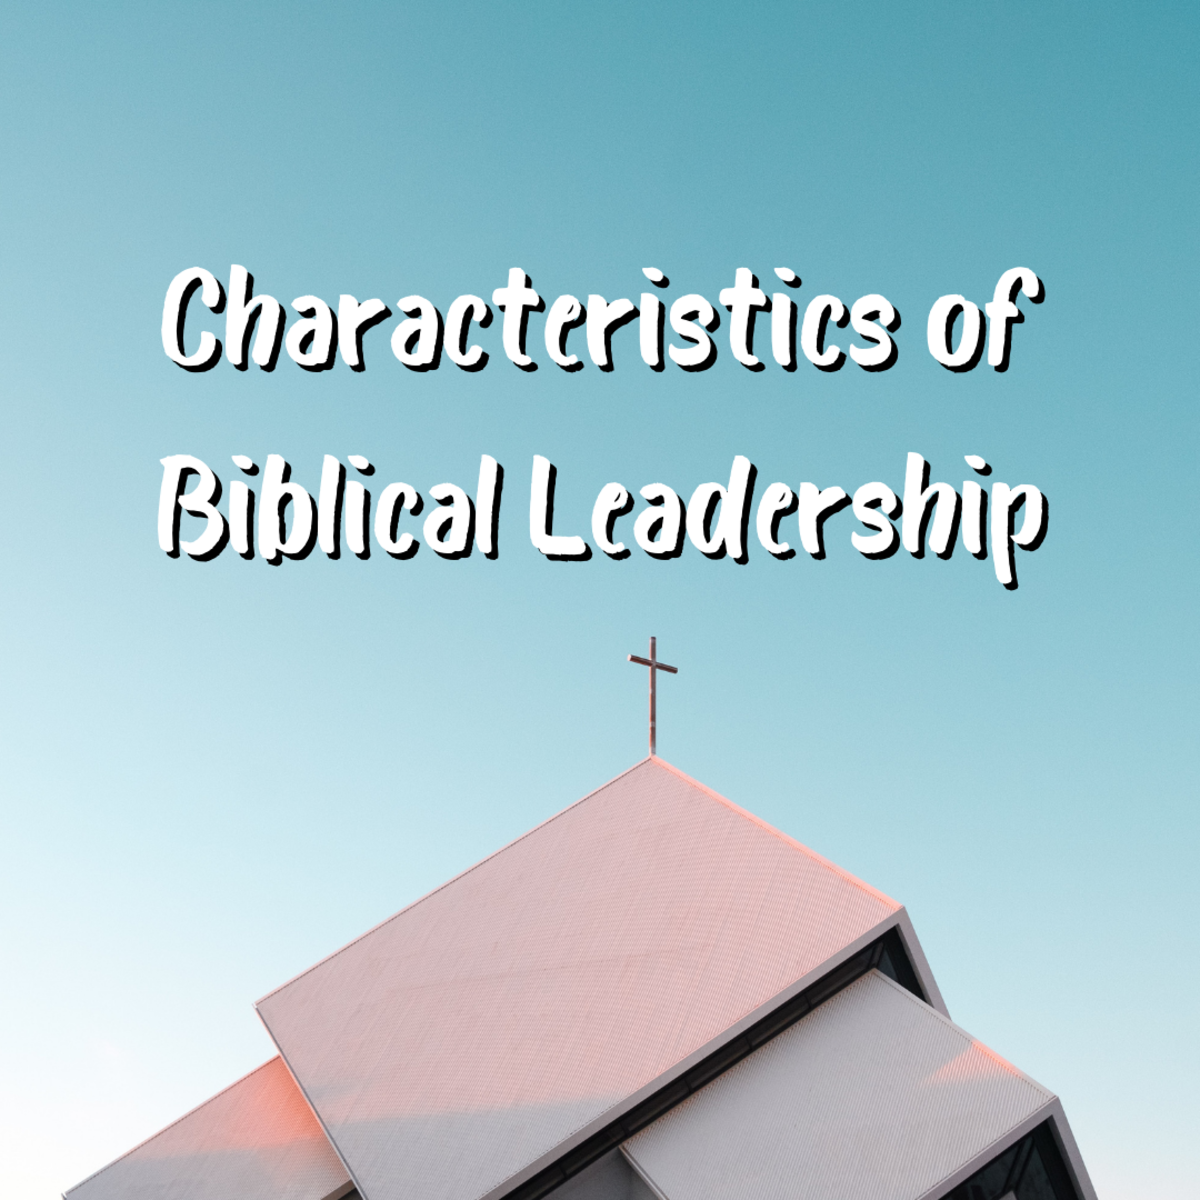 Read on to learn the characteristic of Biblical leaderhsip.